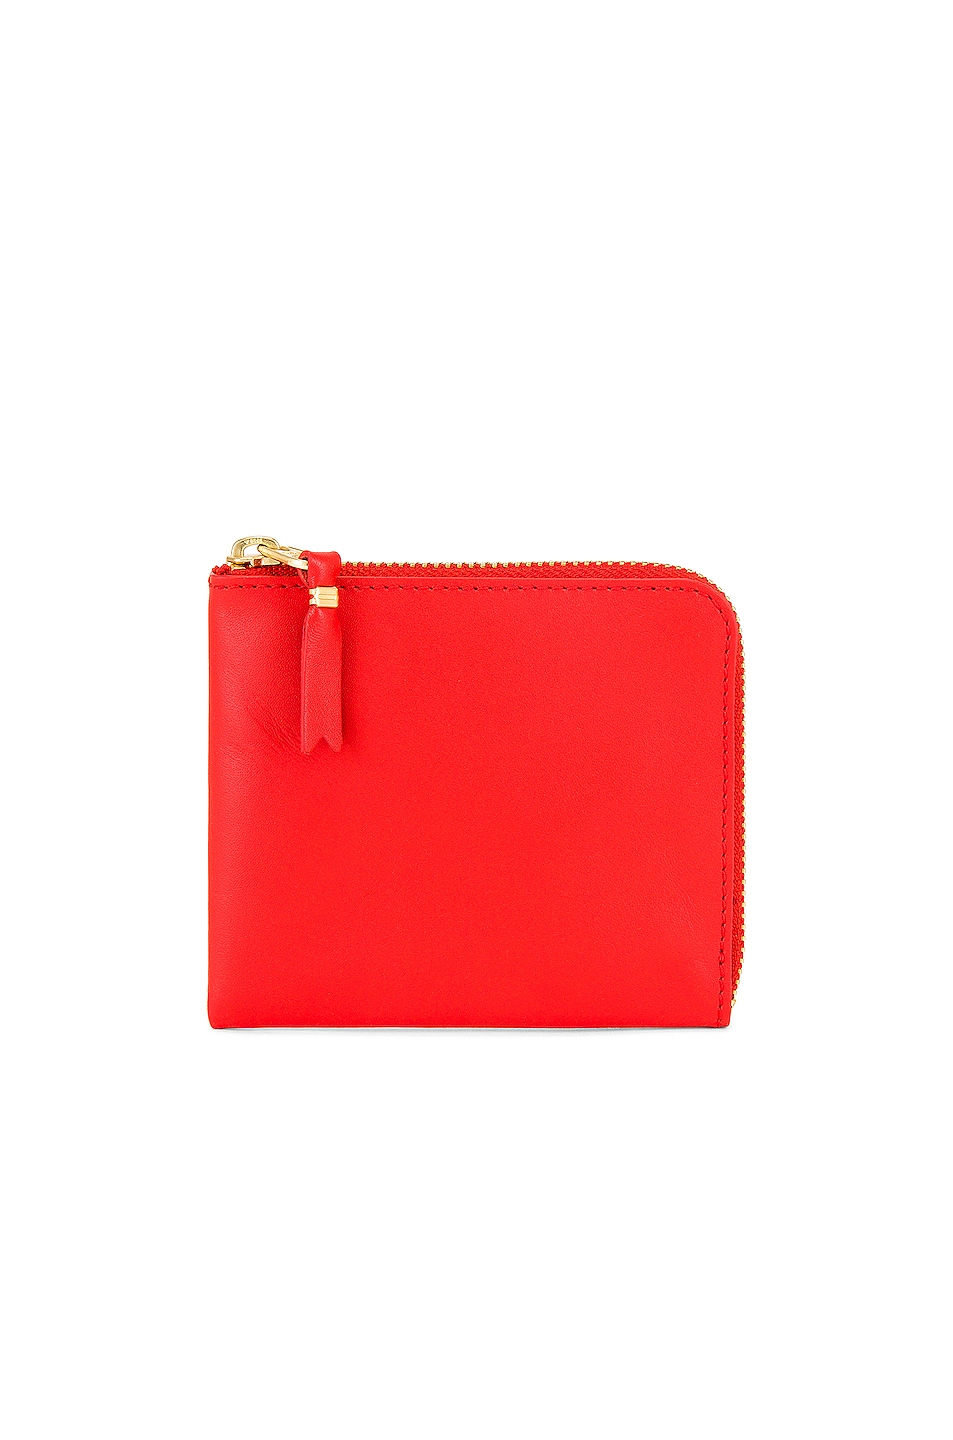 Classic Leather Zip Wallet in Red